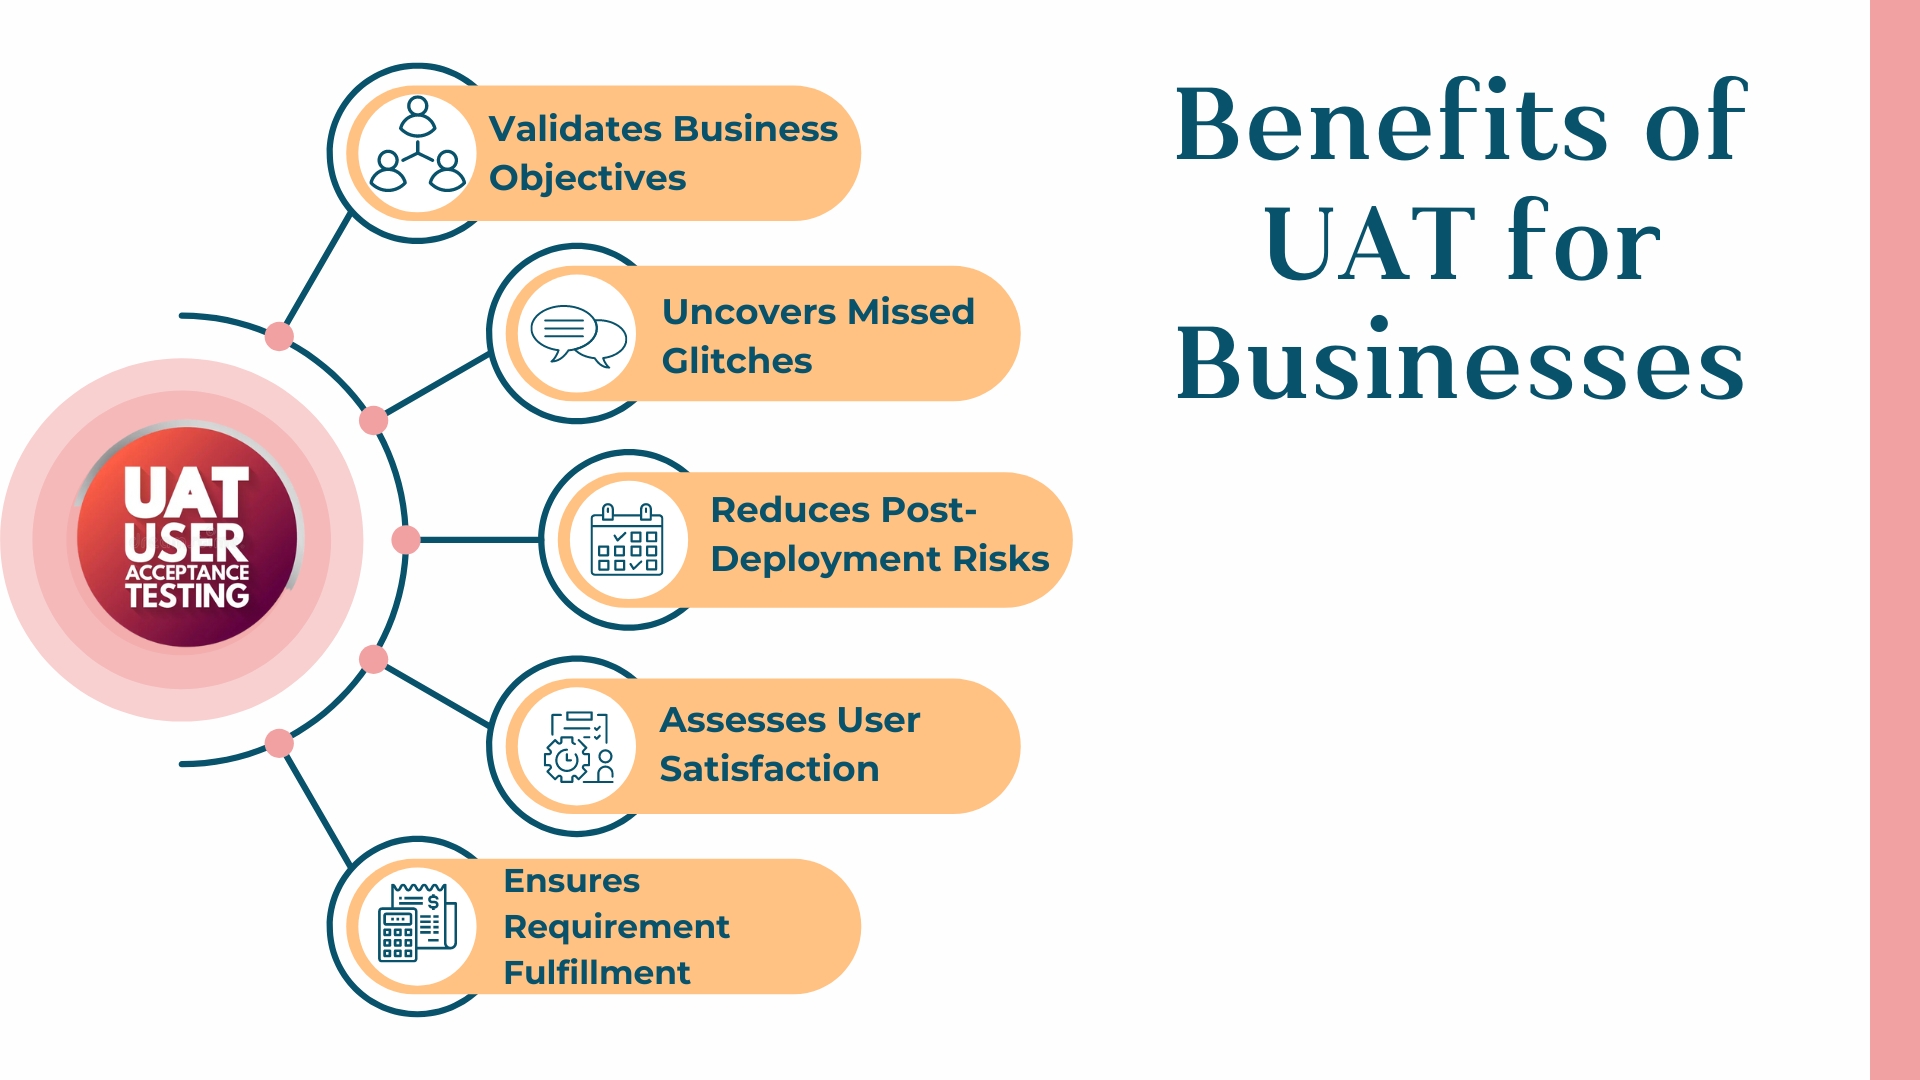 Benefits of UAT for businesses